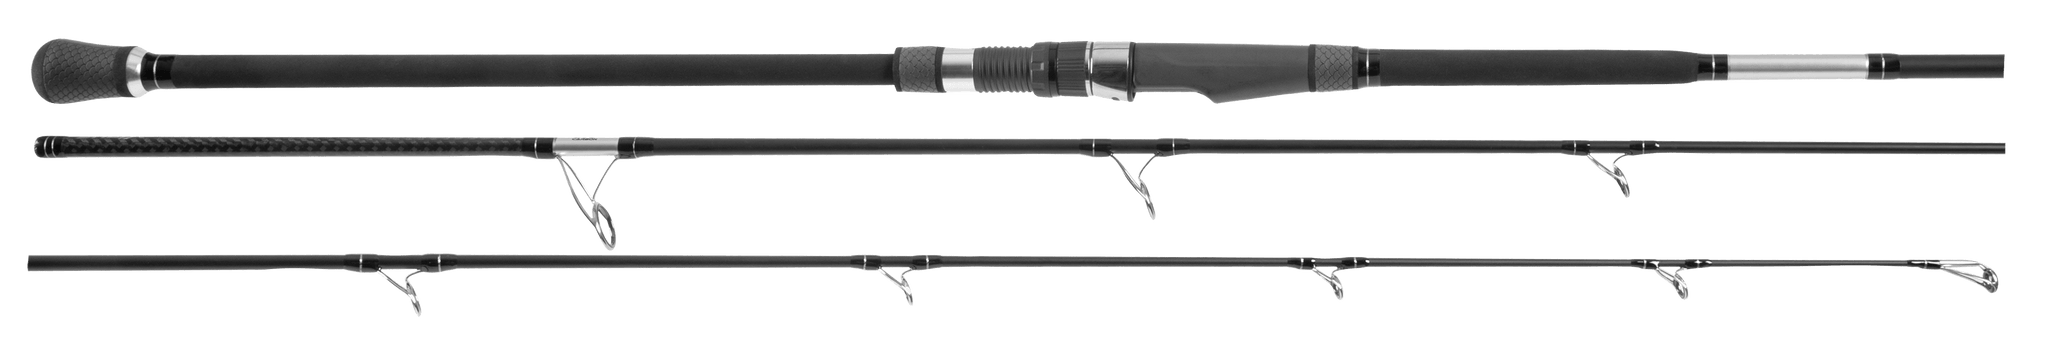 Tsunami SaltX II Surf Spinning Rods are in stock! Four models from  $299.99-$399.99. #jandhtackle #fishing #surfcasting @tsunamitackle